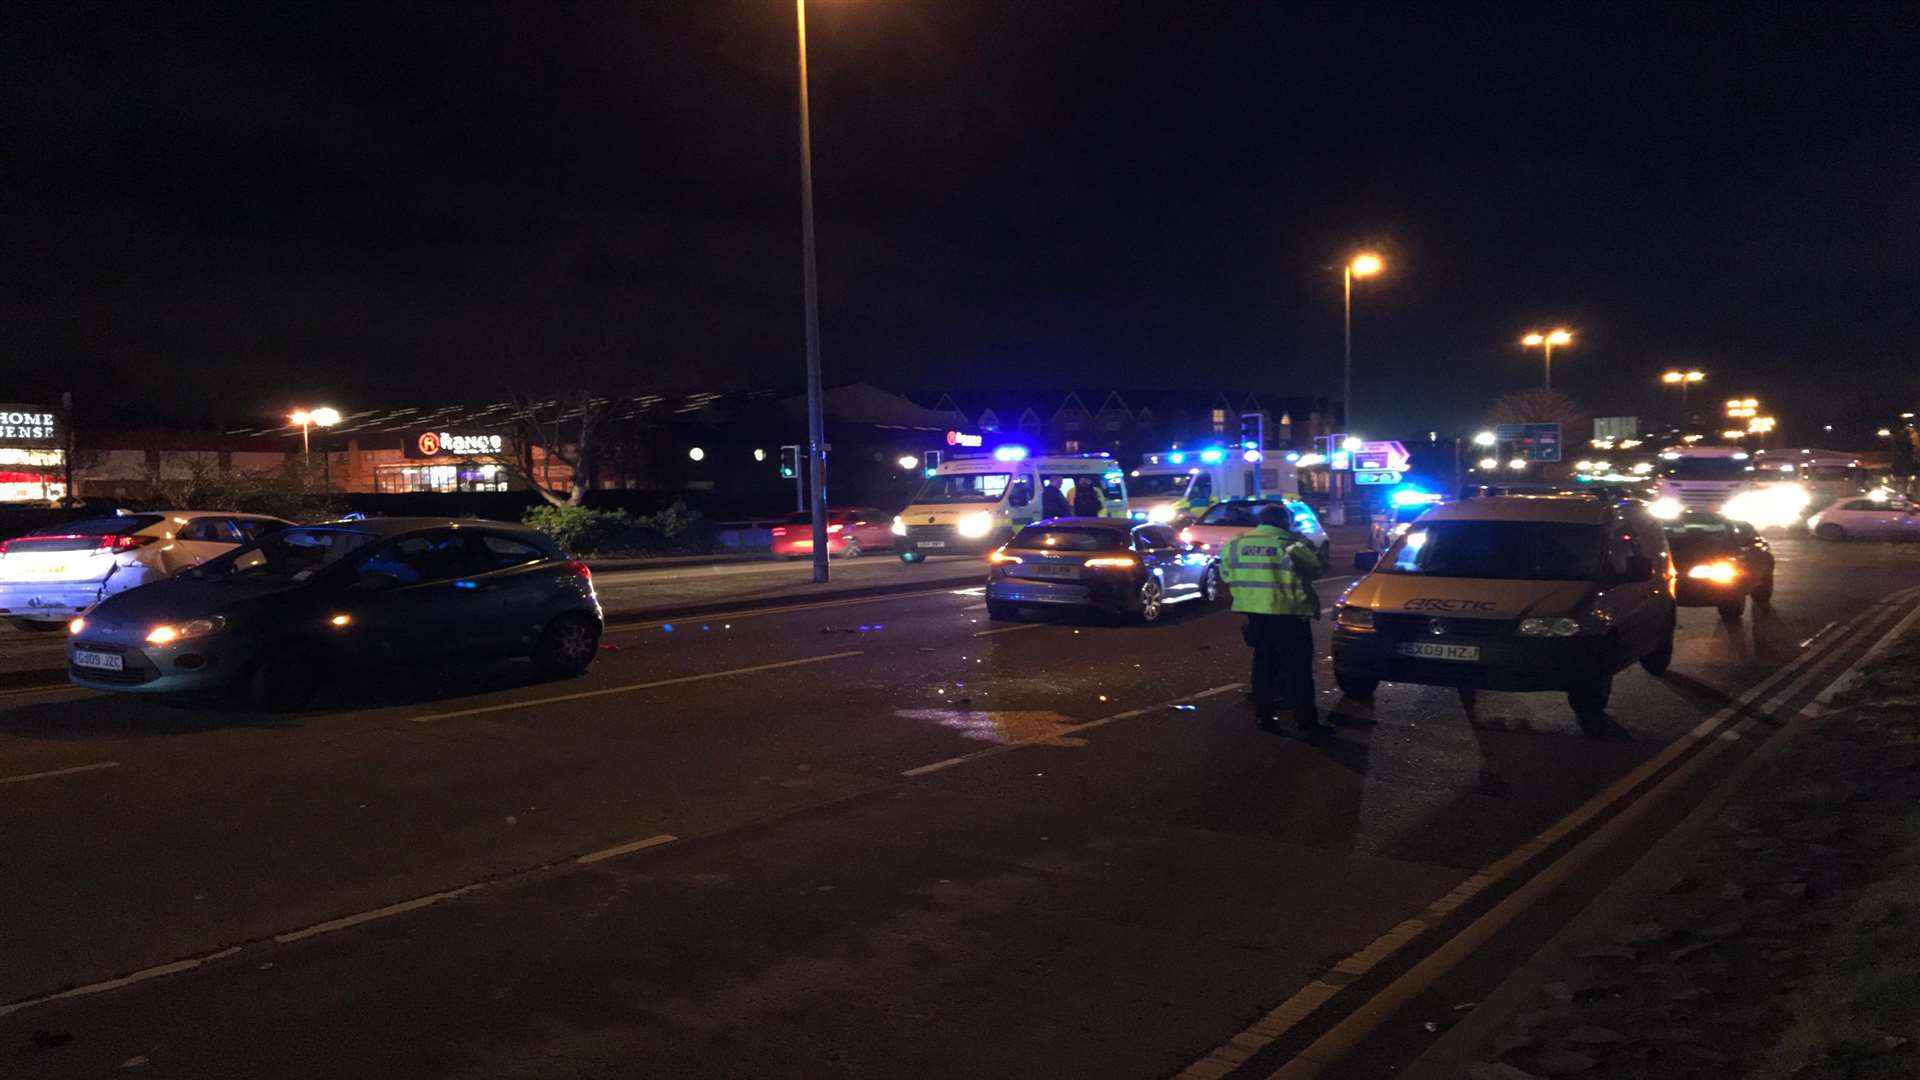 The crash happened next to the Fremlin Walk shopping centre car park on the A229 Fairmeadow and left debris strewn across the road on Wednesday, November 30